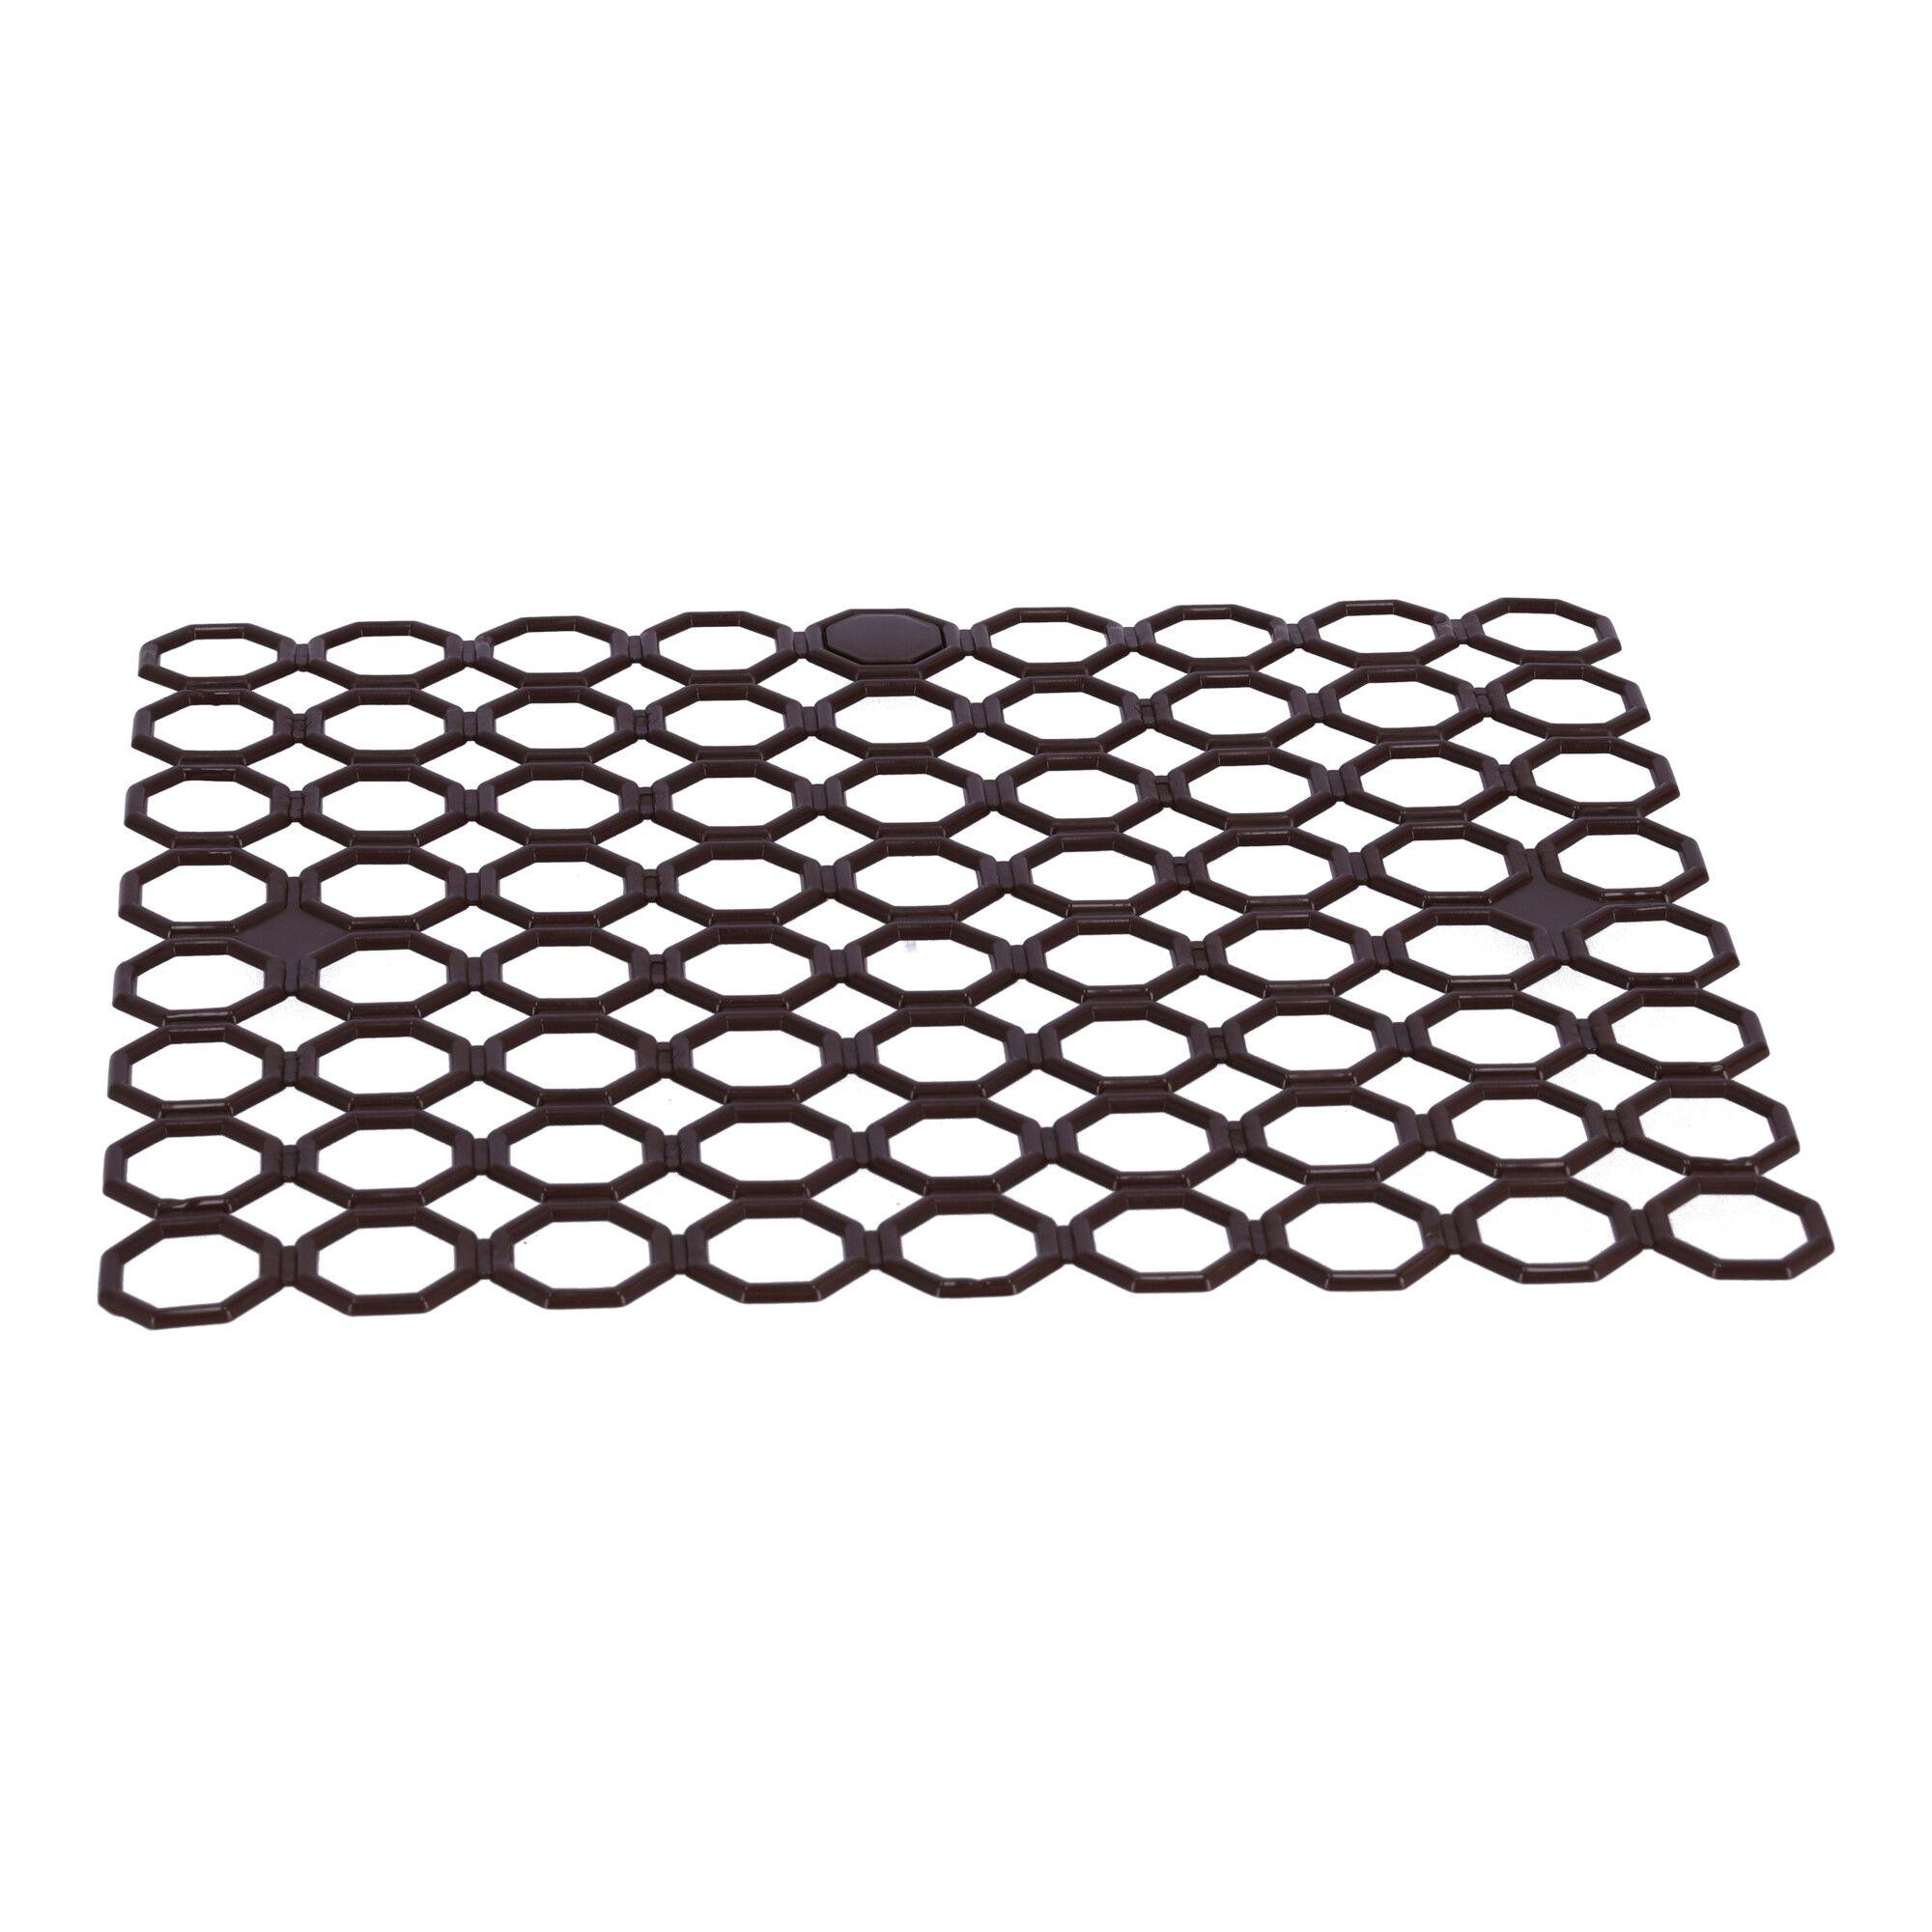 Grille mat sink insert, square POLISH PRODUCT